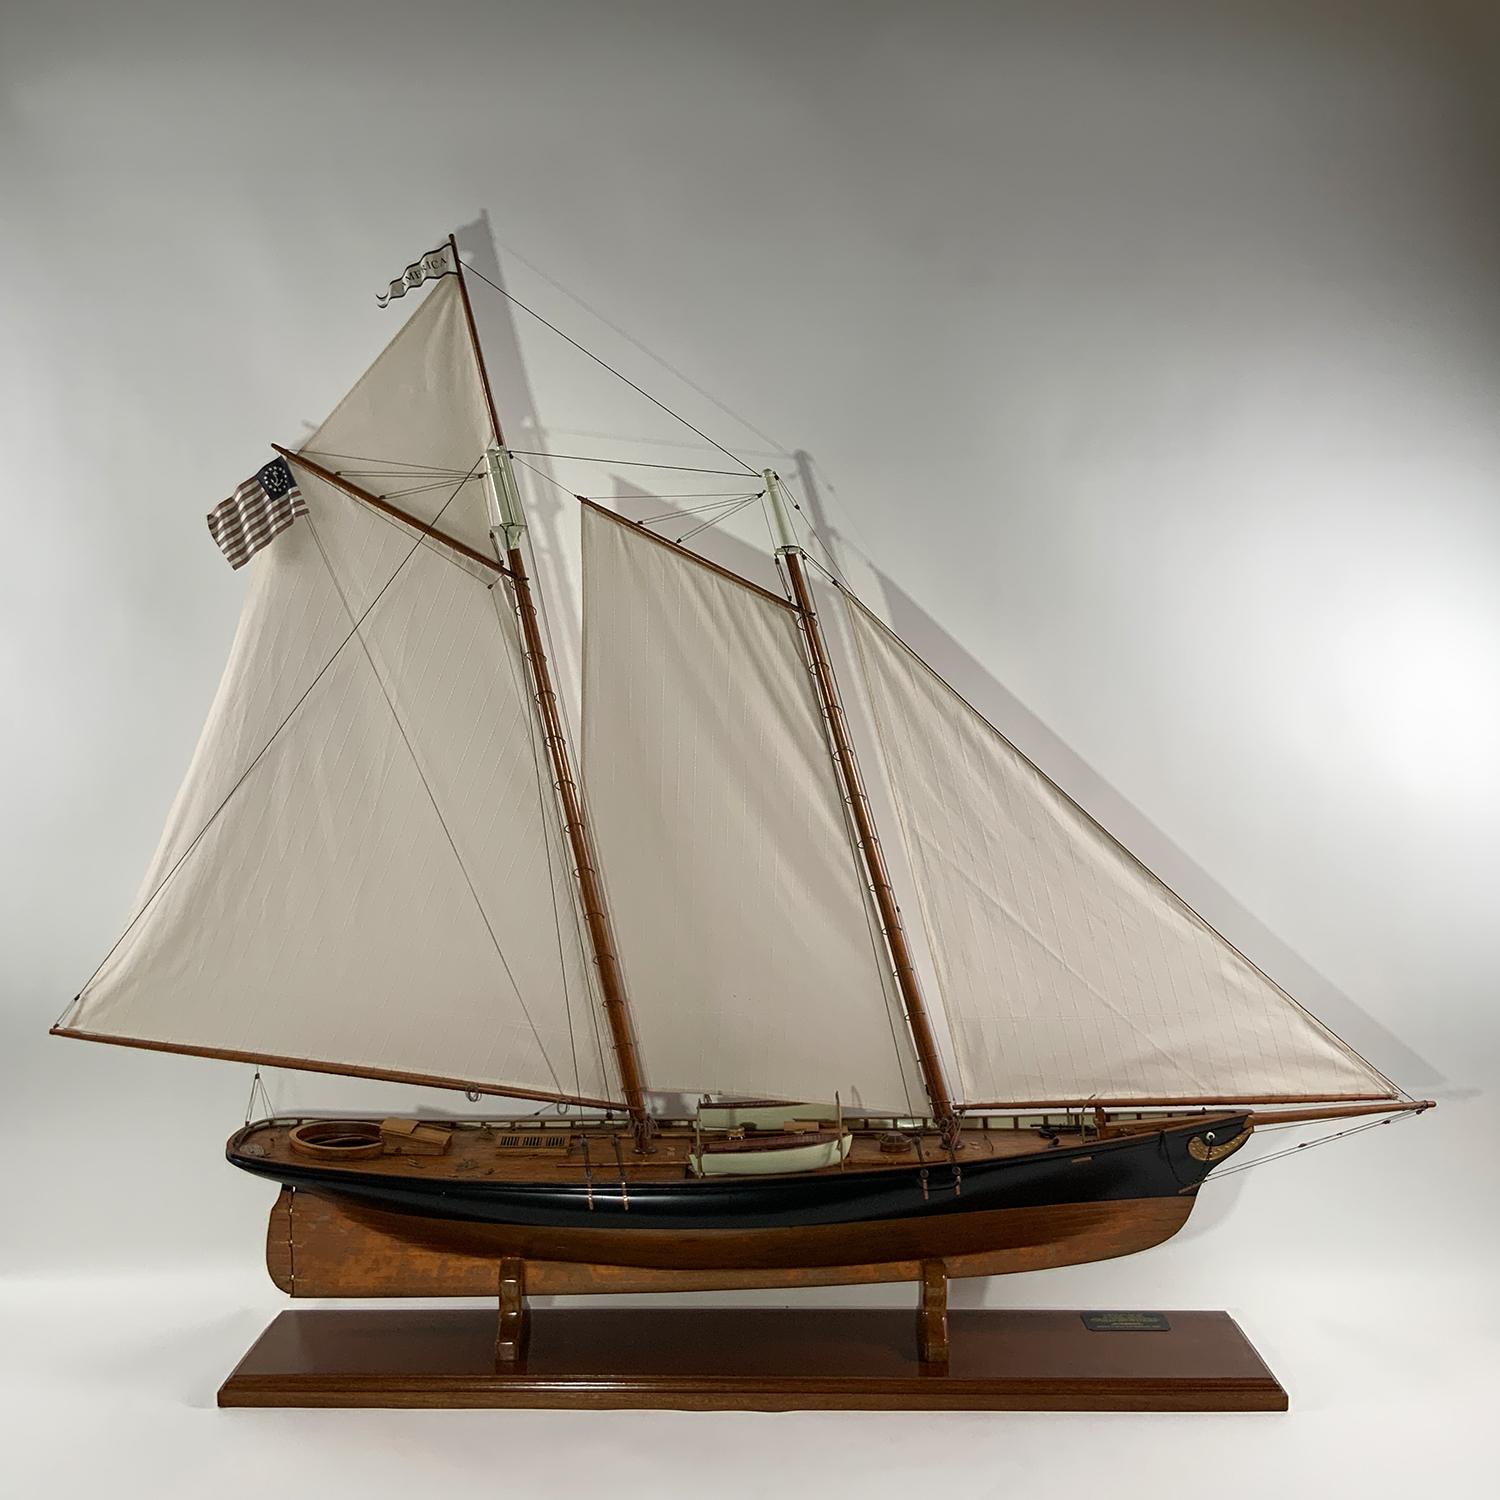 Five and a half foot precision scale model of the America's Cup Yacht America of 1851. Sleek hull is copper sheathed below the waterline down. Planked and varnished mahogany deck. Rigged with a full suit of sails. Circa 2000.